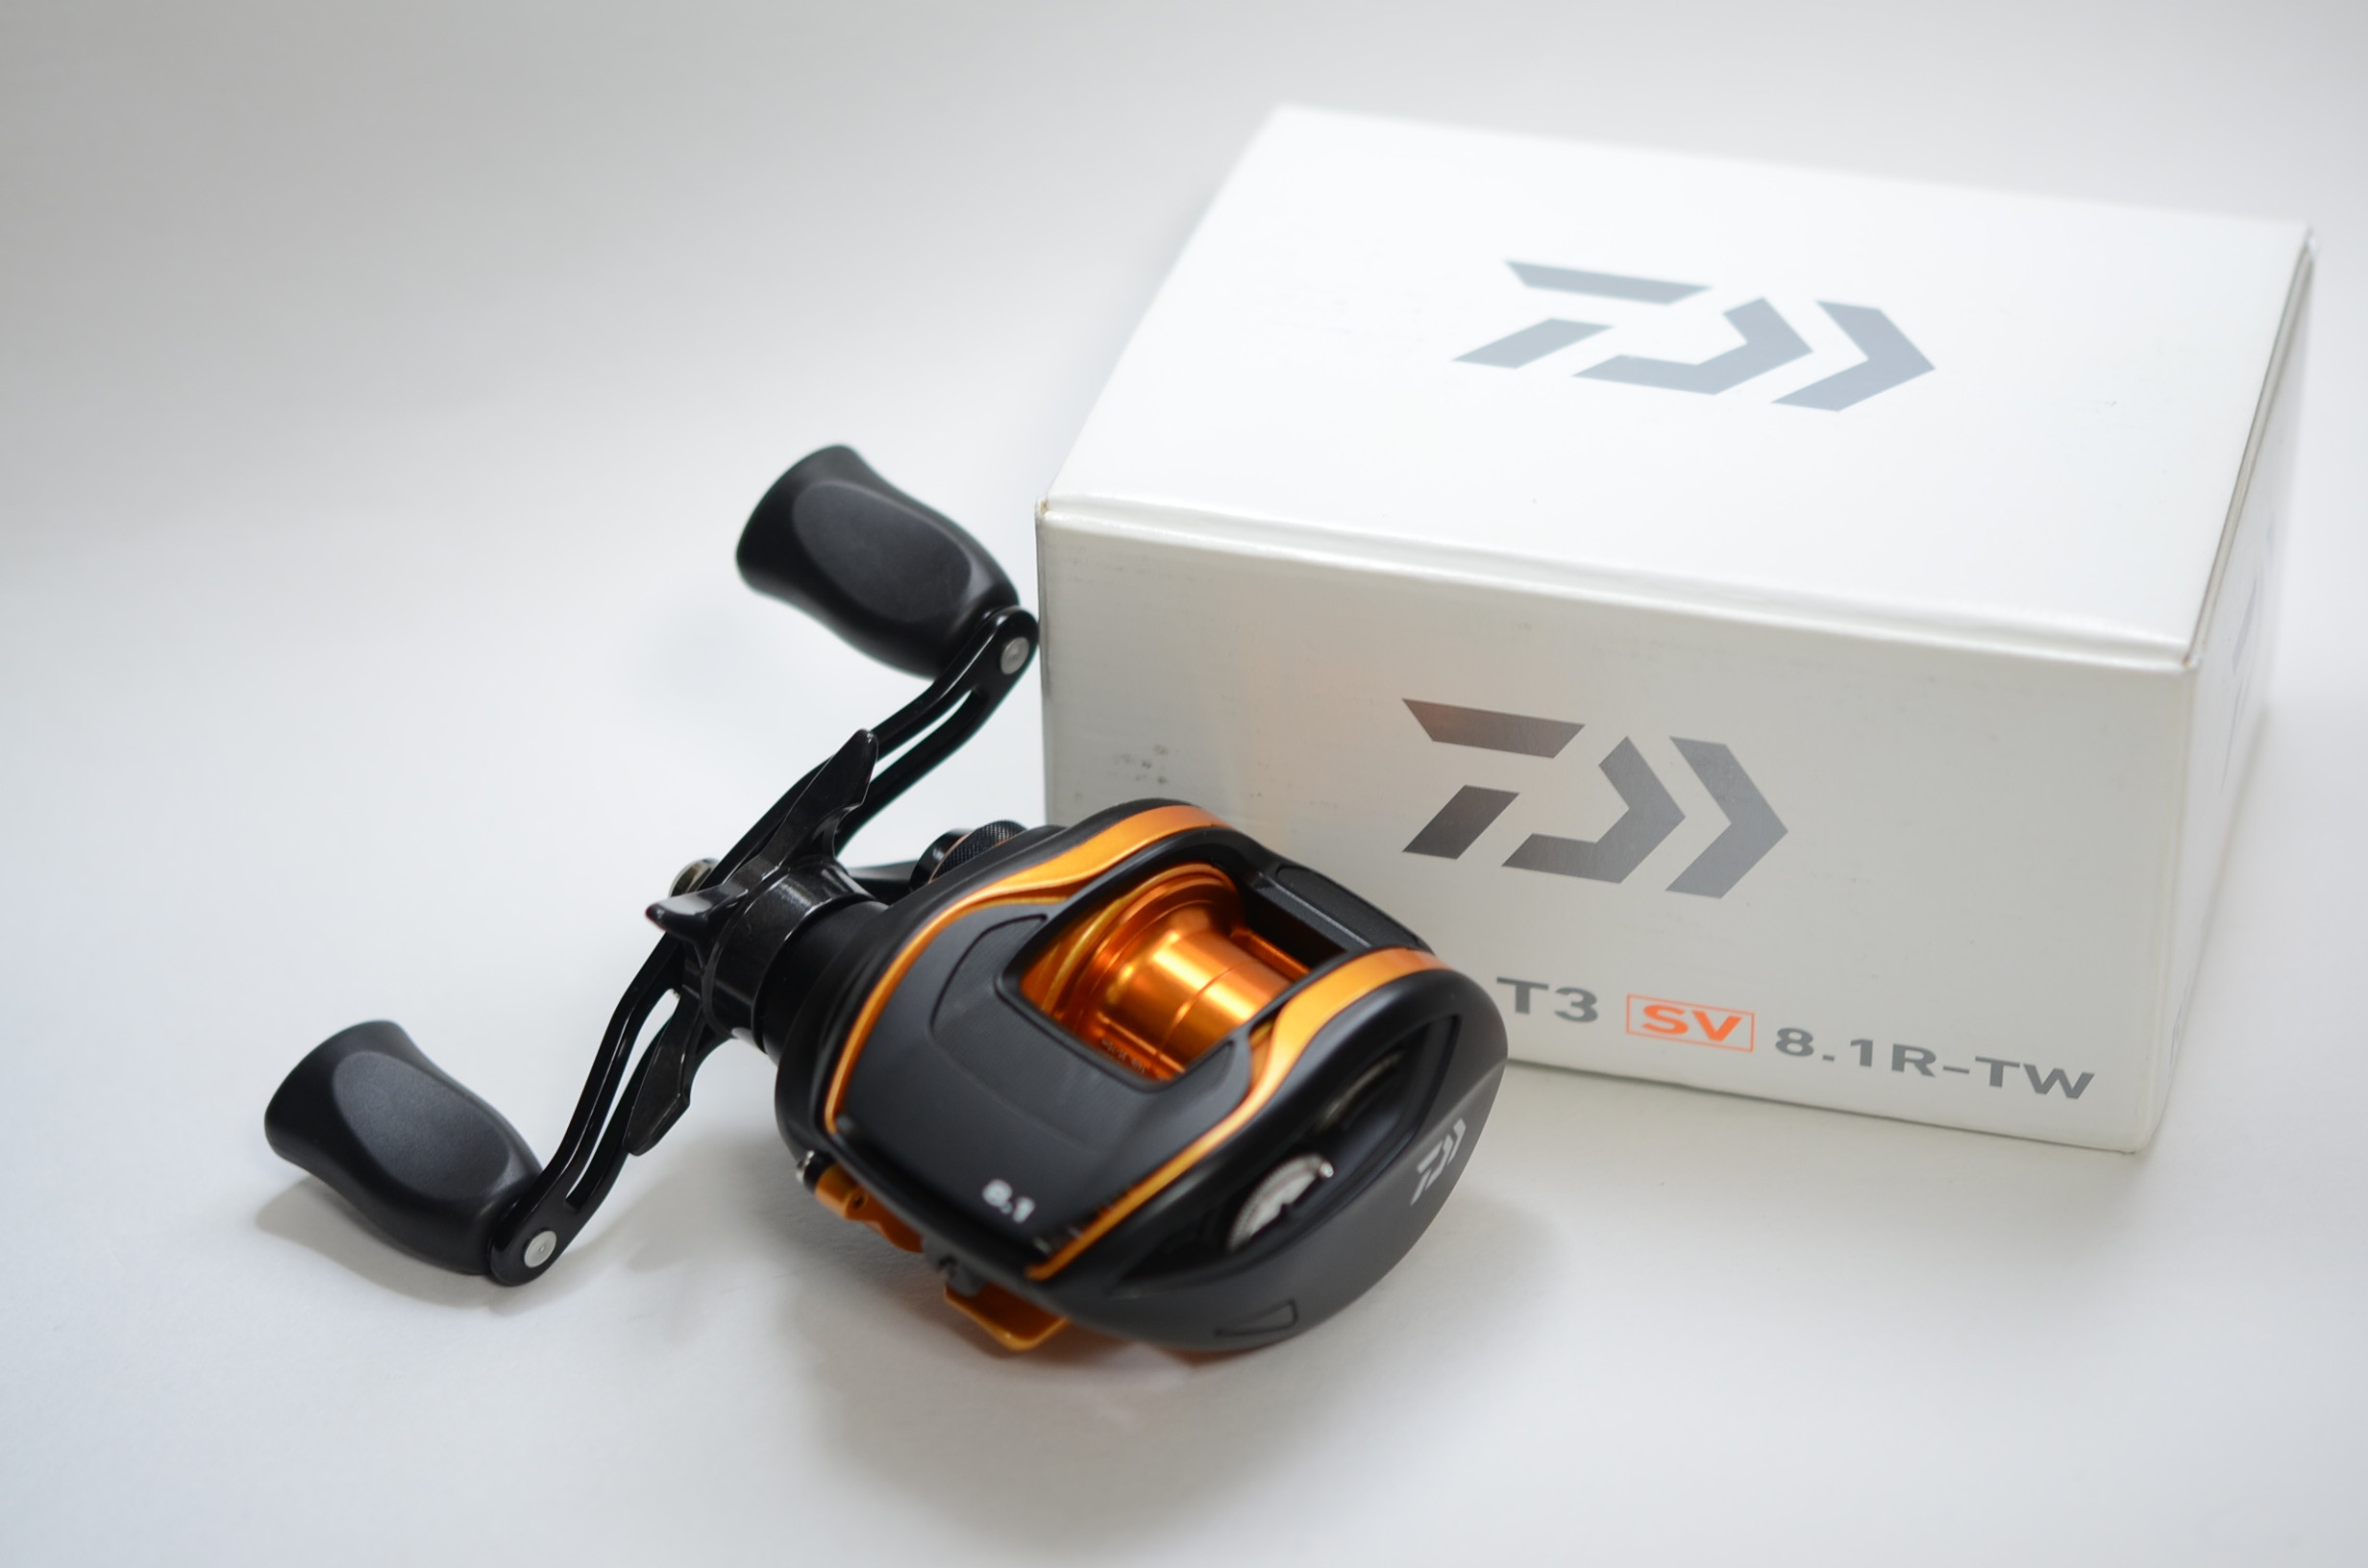 Used Daiwa T3 SV 8.1R-TW Like New 9.5/10 condition